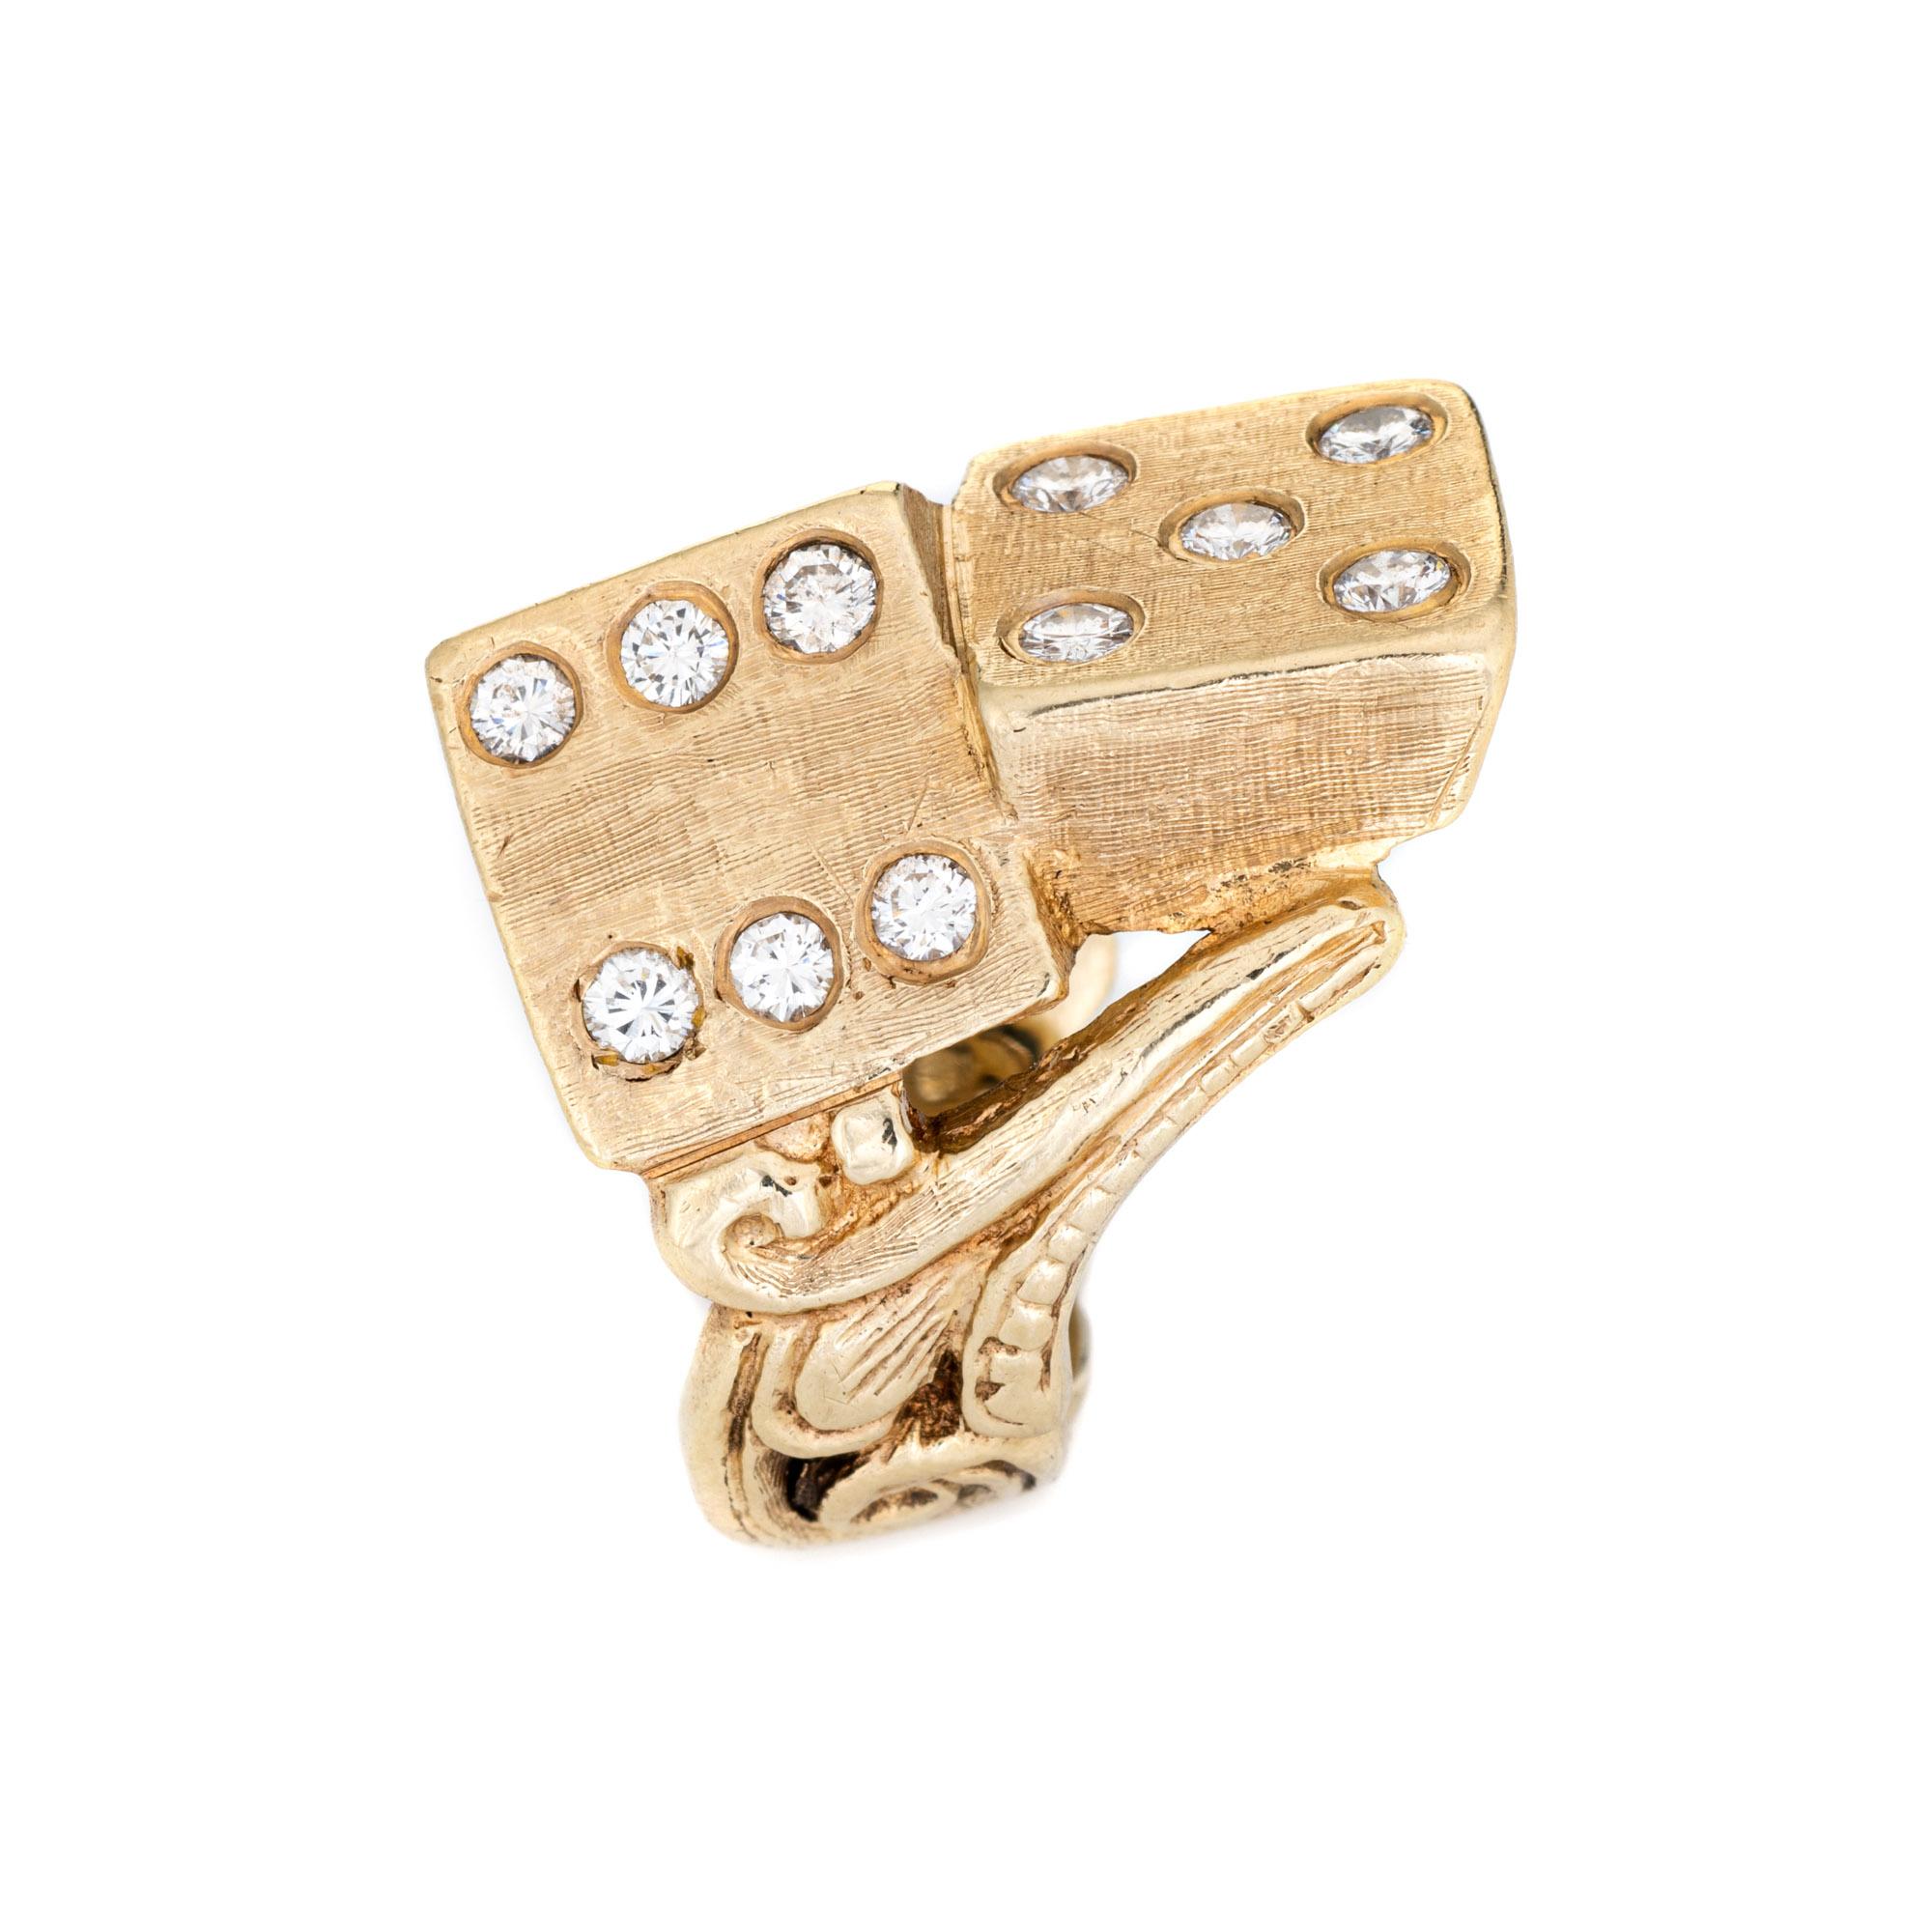 Finely detailed vintage diamond dice ring crafted in 14 karat yellow gold (circa 1970s). 

13 round brilliant cut diamonds total an estimated 0.65 carats (estimated at H-I color and VS2-I1 clarity).
The elaborate and beautifully detailed ring